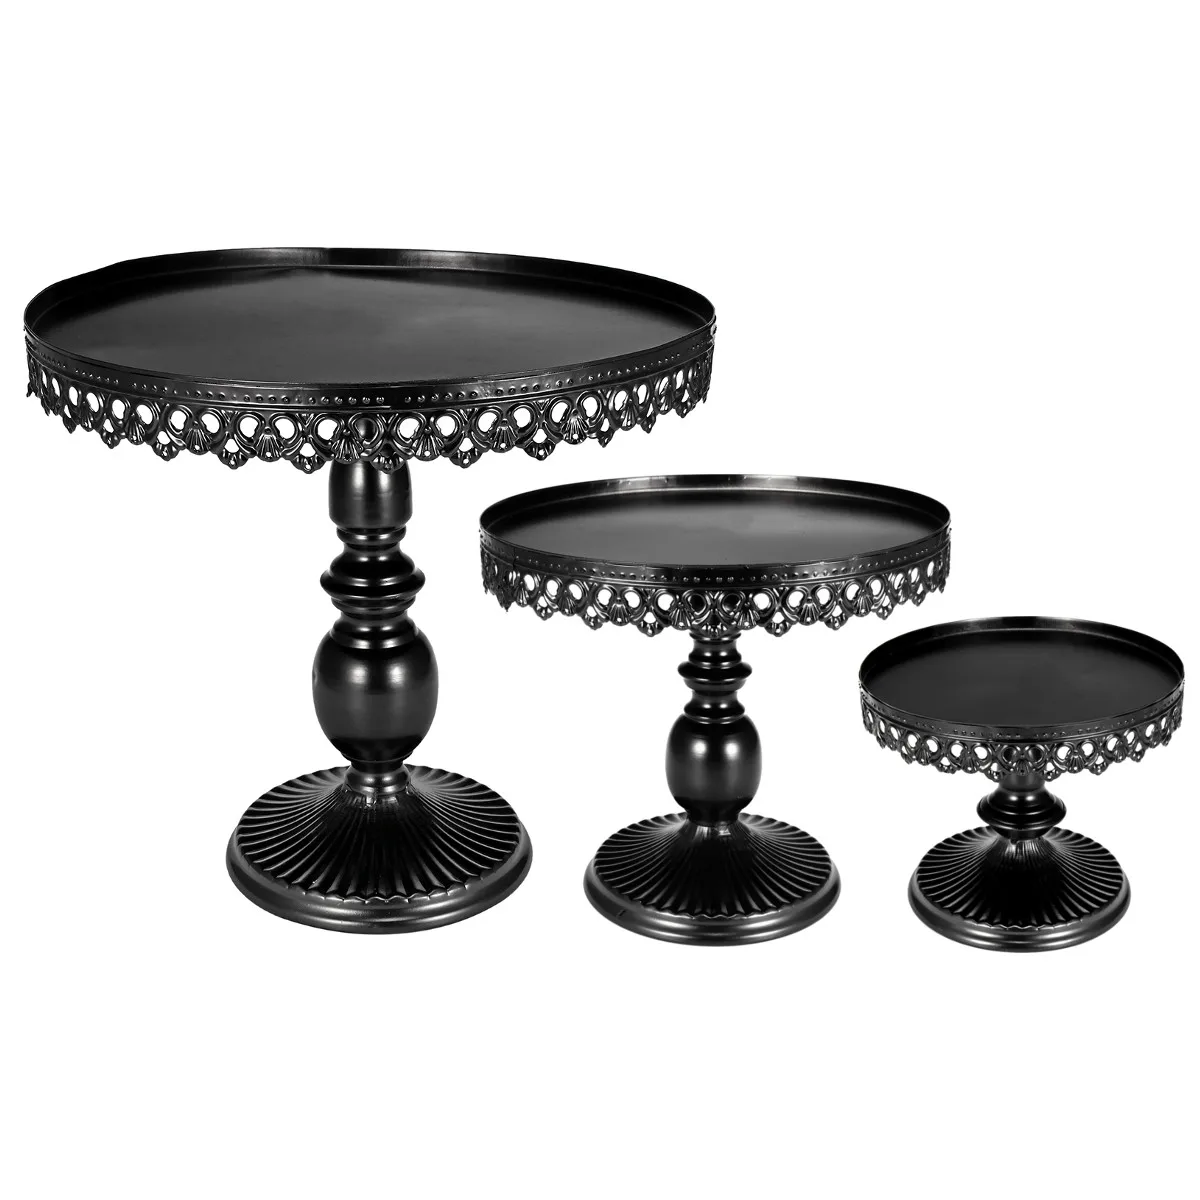 

3 Pieces Metal Iron Cake Stand Set Wedding Cake Tools Fondant Cake Display Kit For Party Bakeware Cake Tools Baker Accessories